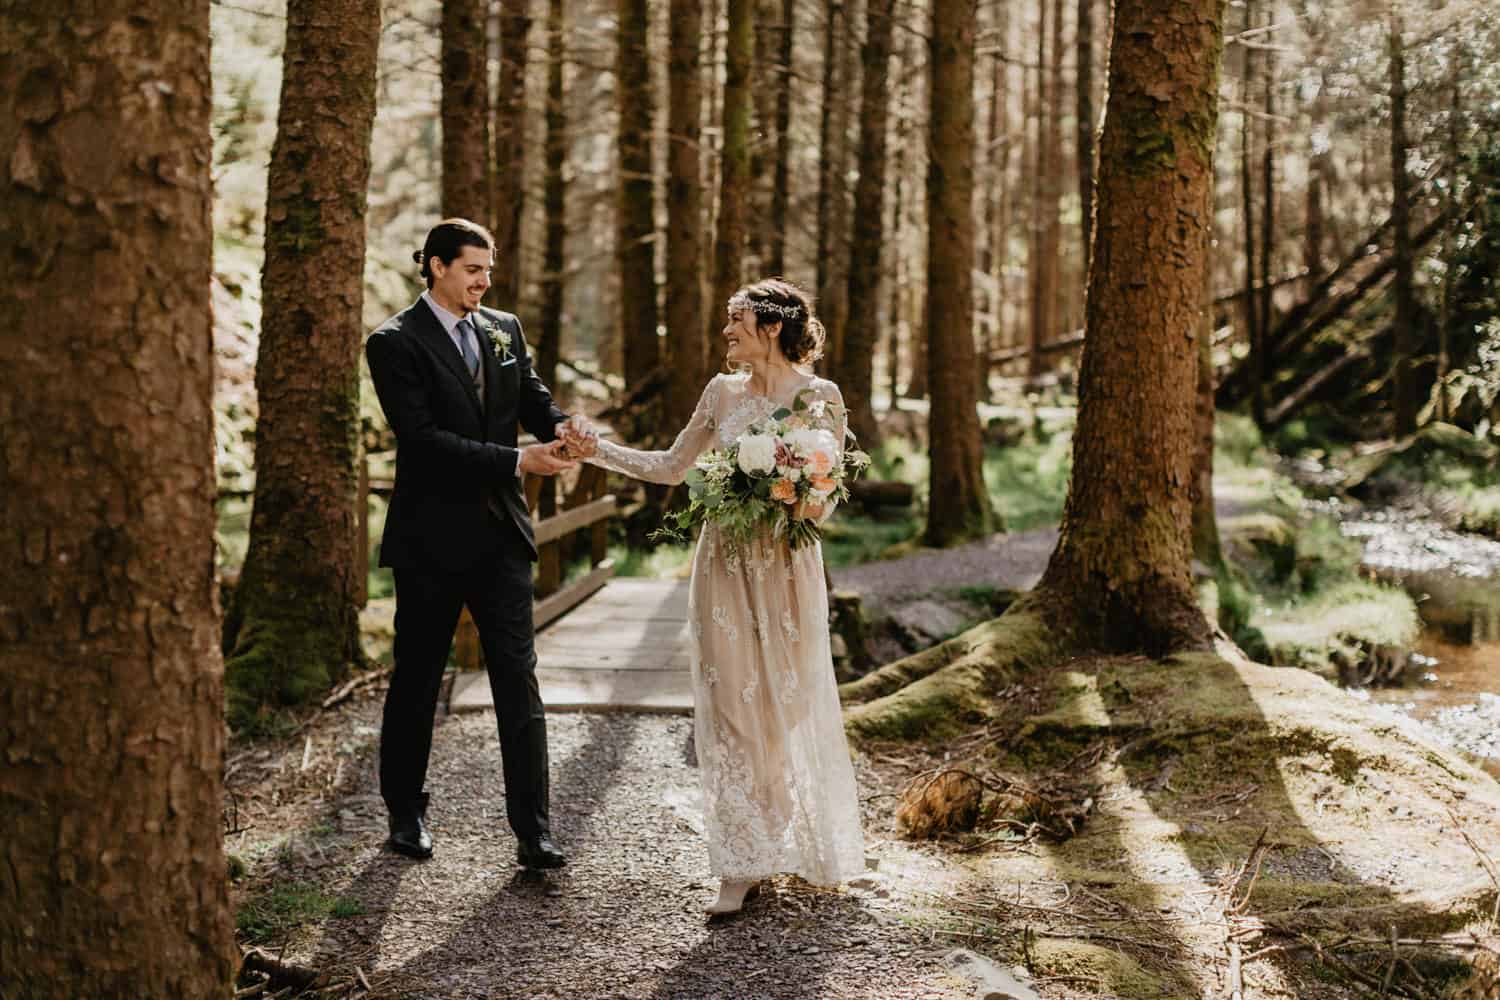 A couple eloping in forest